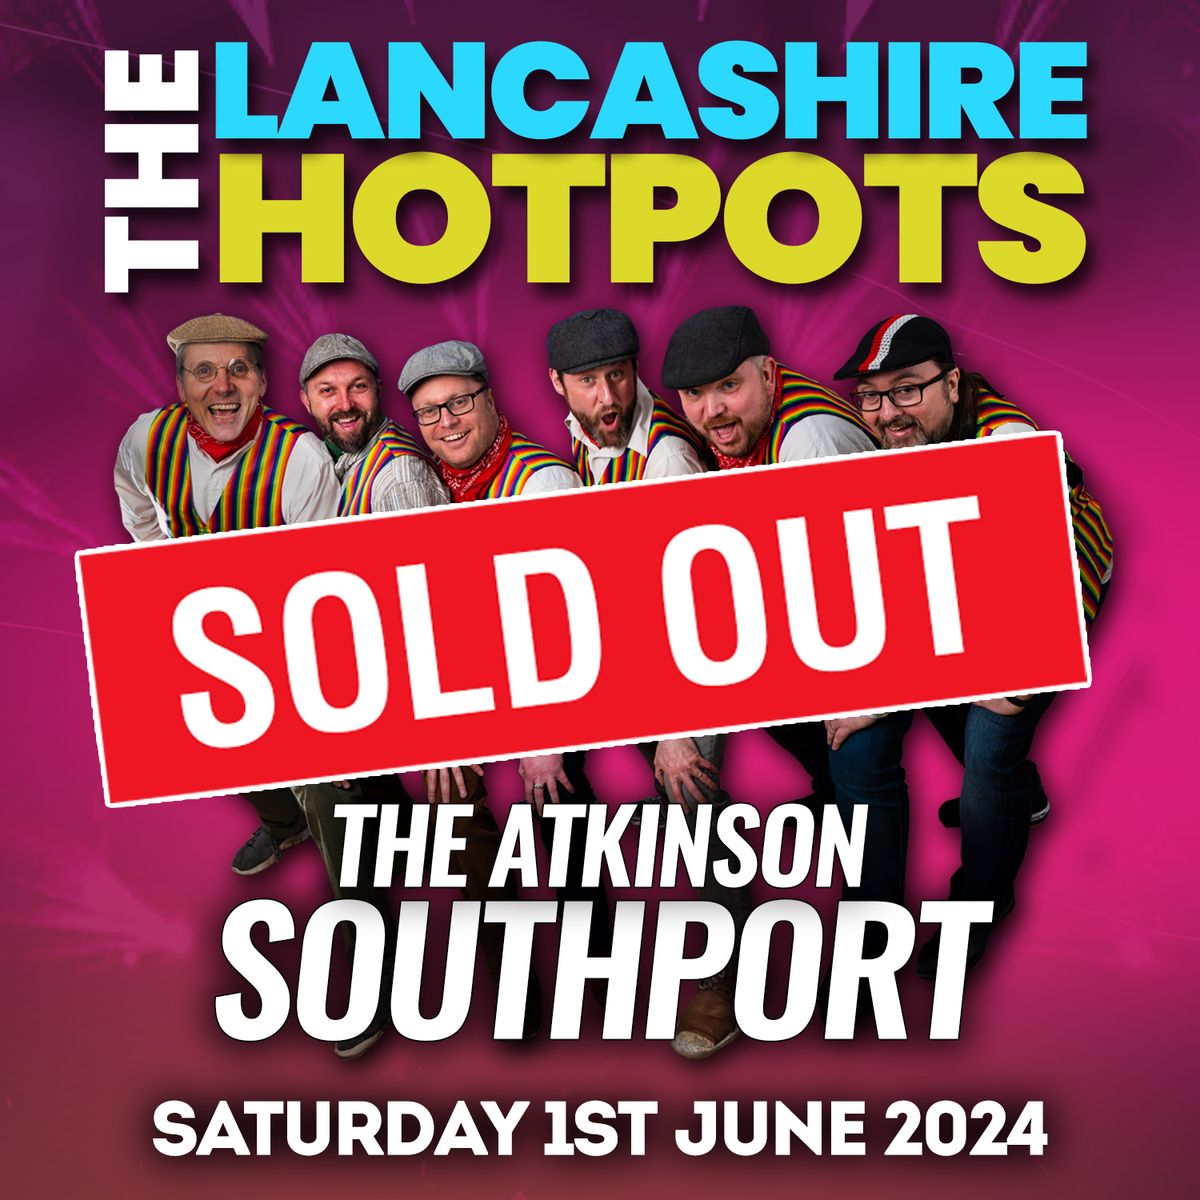 The Lancashire Hotpots Hit Southport  (S0ld Out)